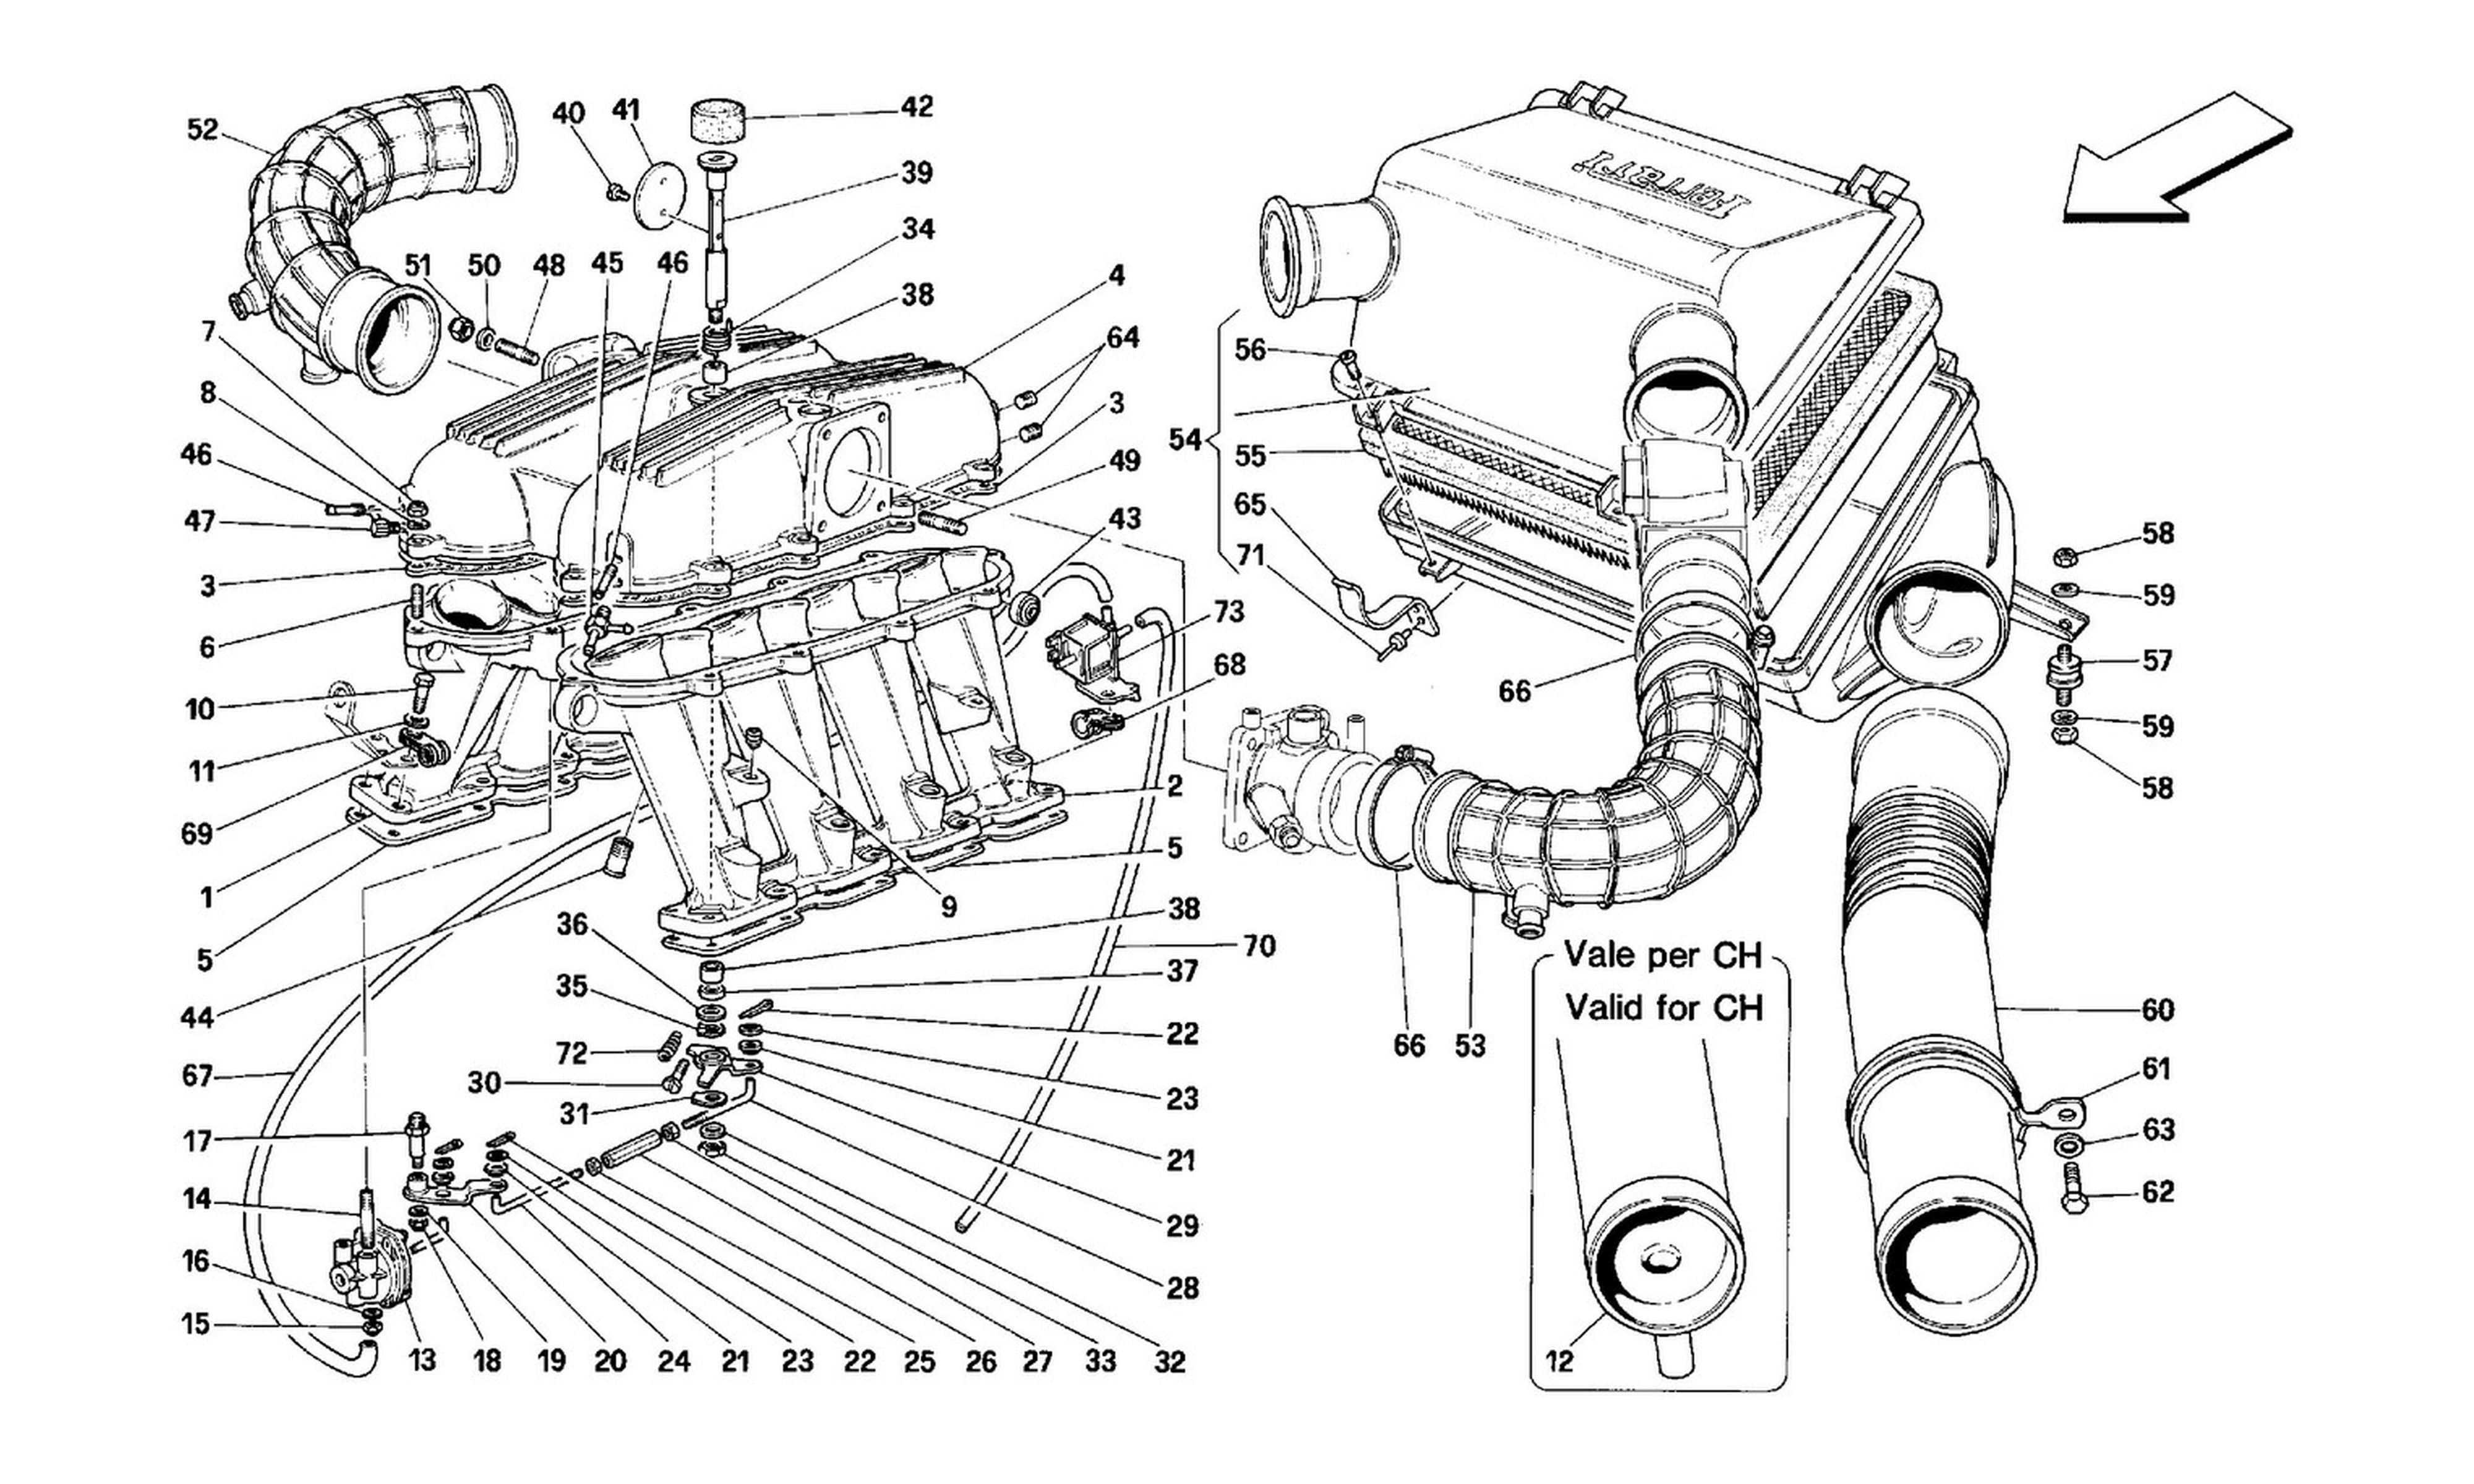 Schematic: Manifolds And Air Intake -Motronic 2.5-